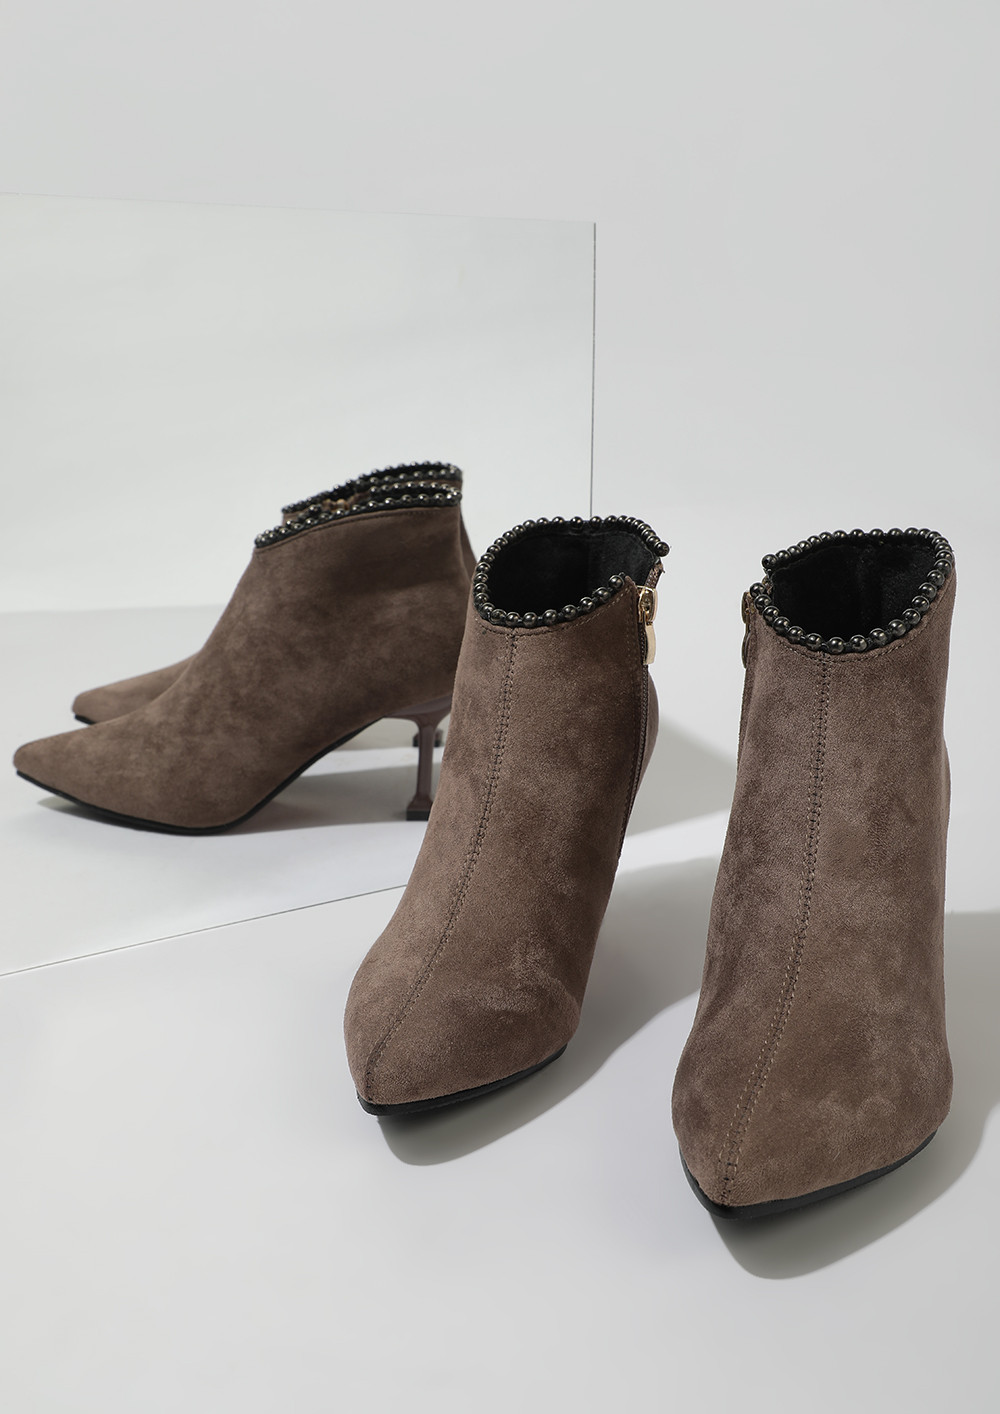 RIDING HIGH COFFEE BROWN ANKLE BOOTS